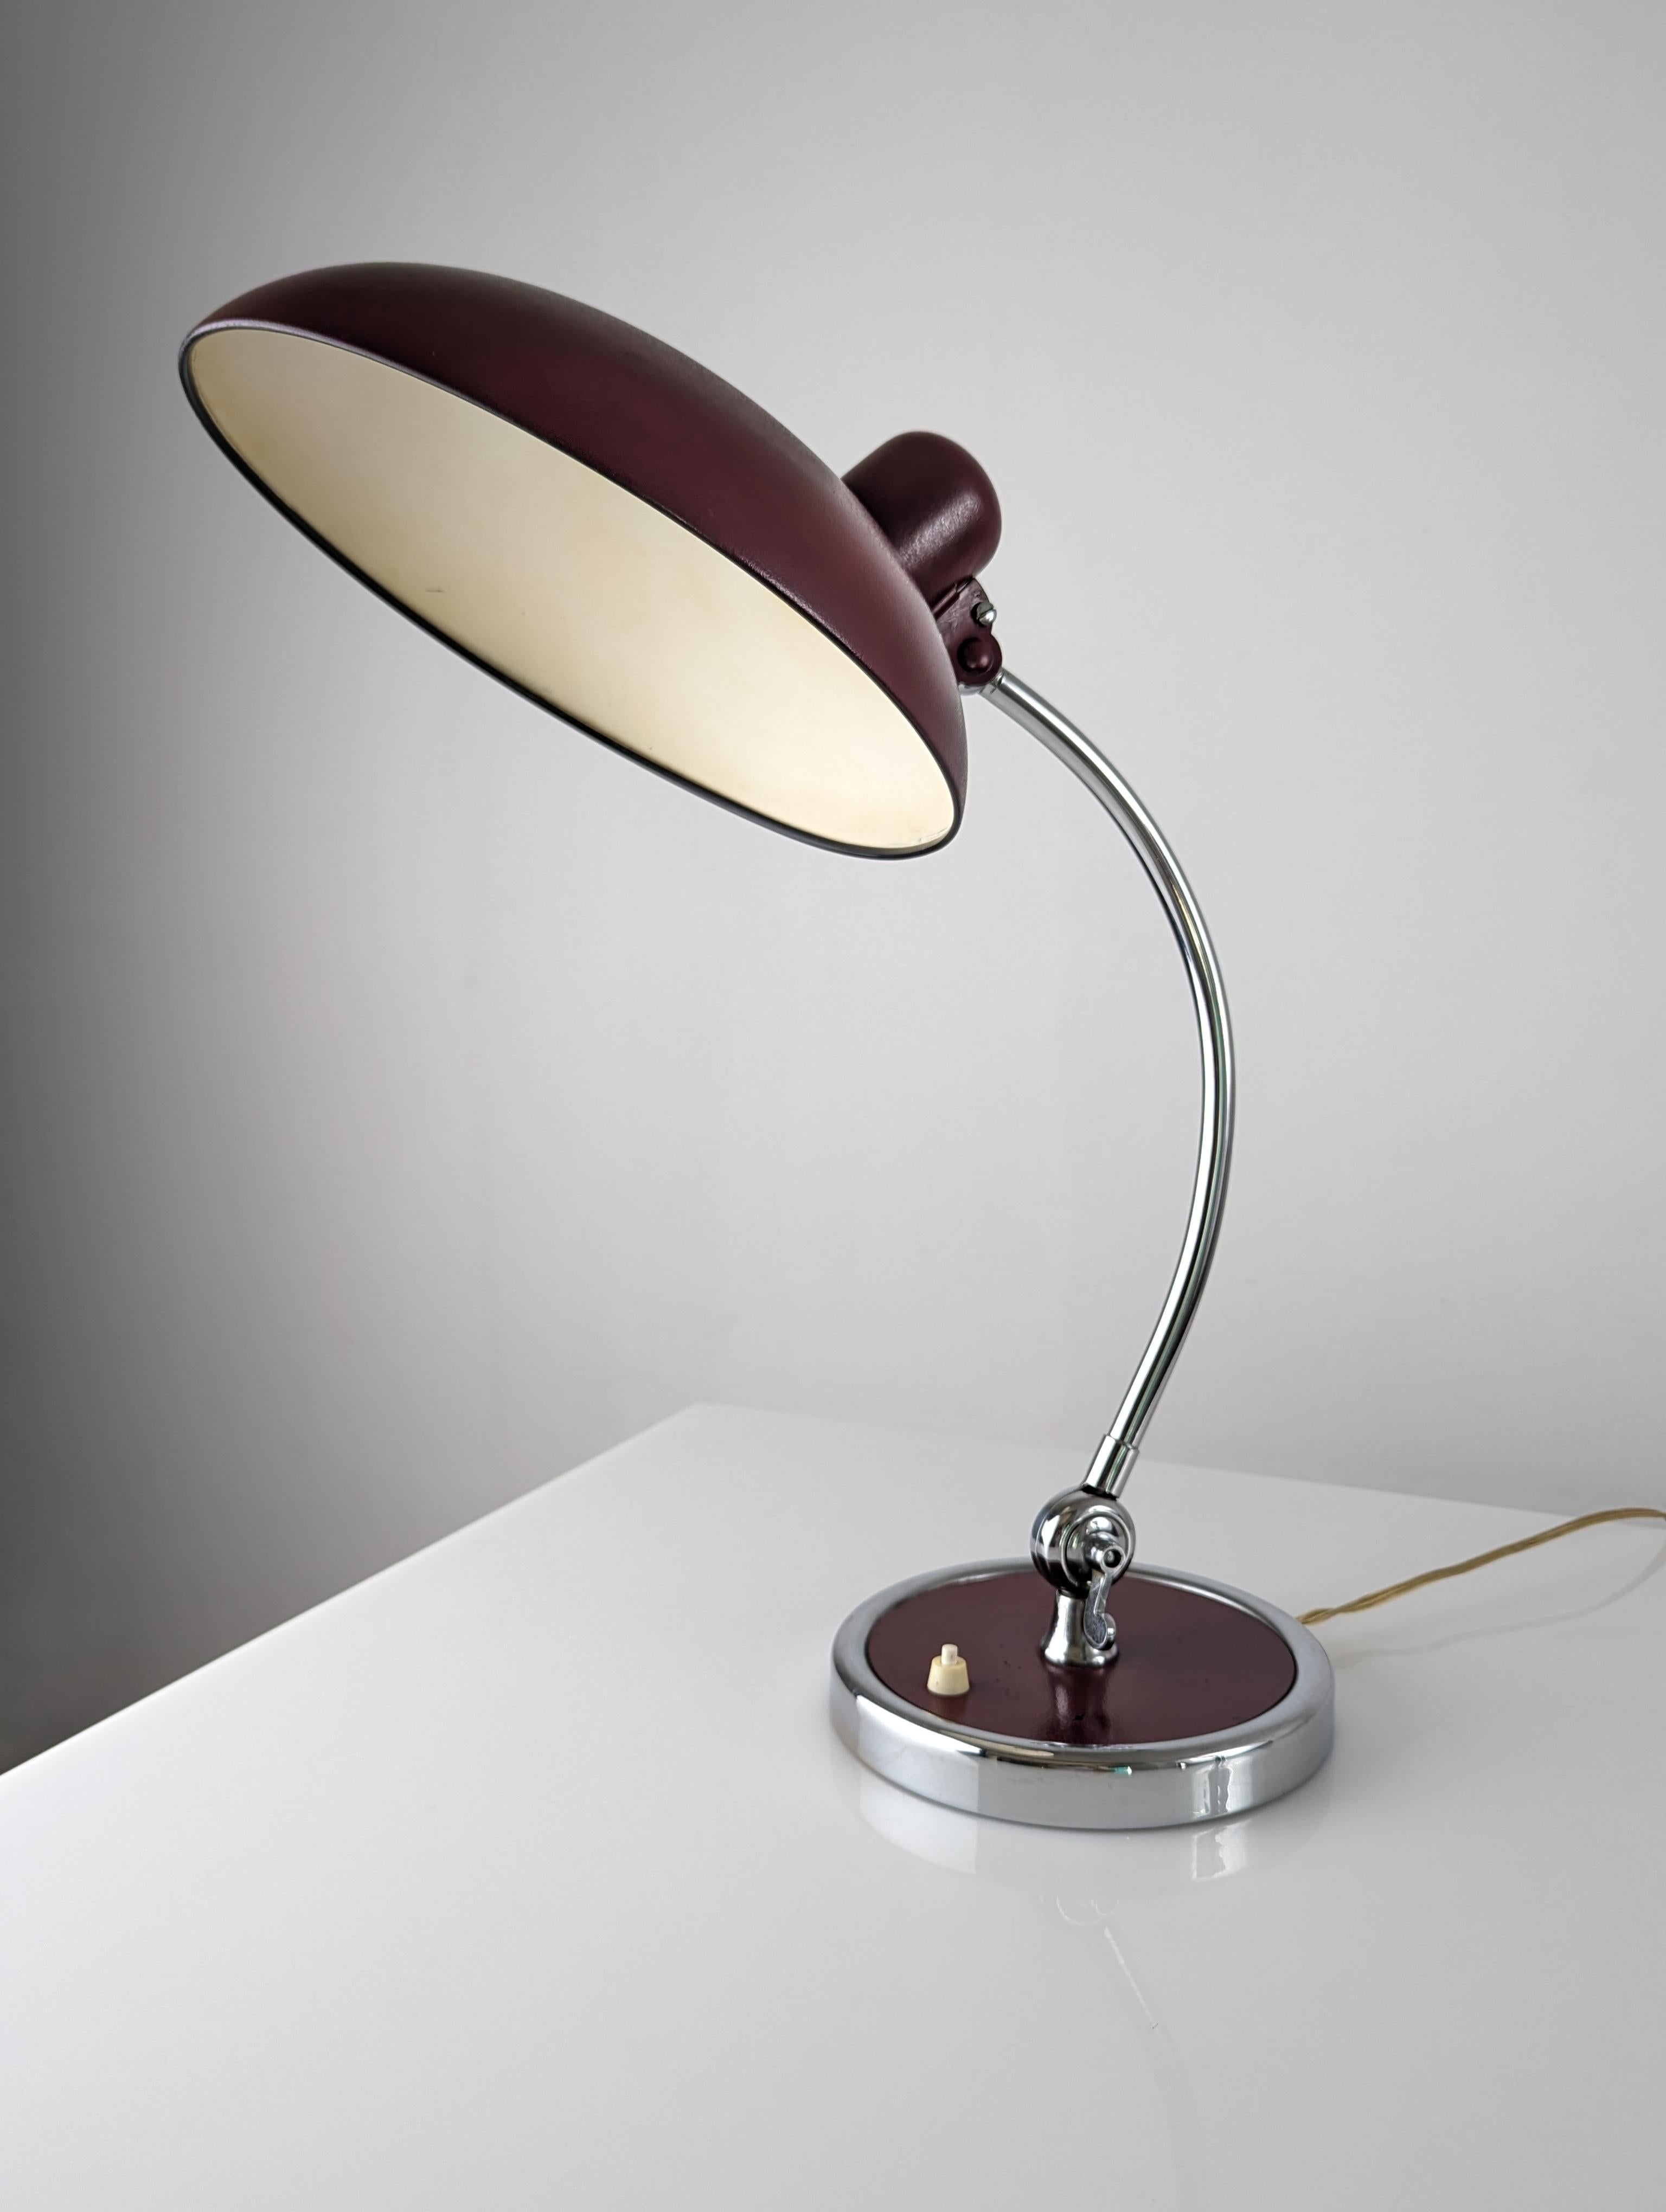 Wonderful desk lamp designed by Christian Dell in an elegant and exclusive burgundy and chrome color.